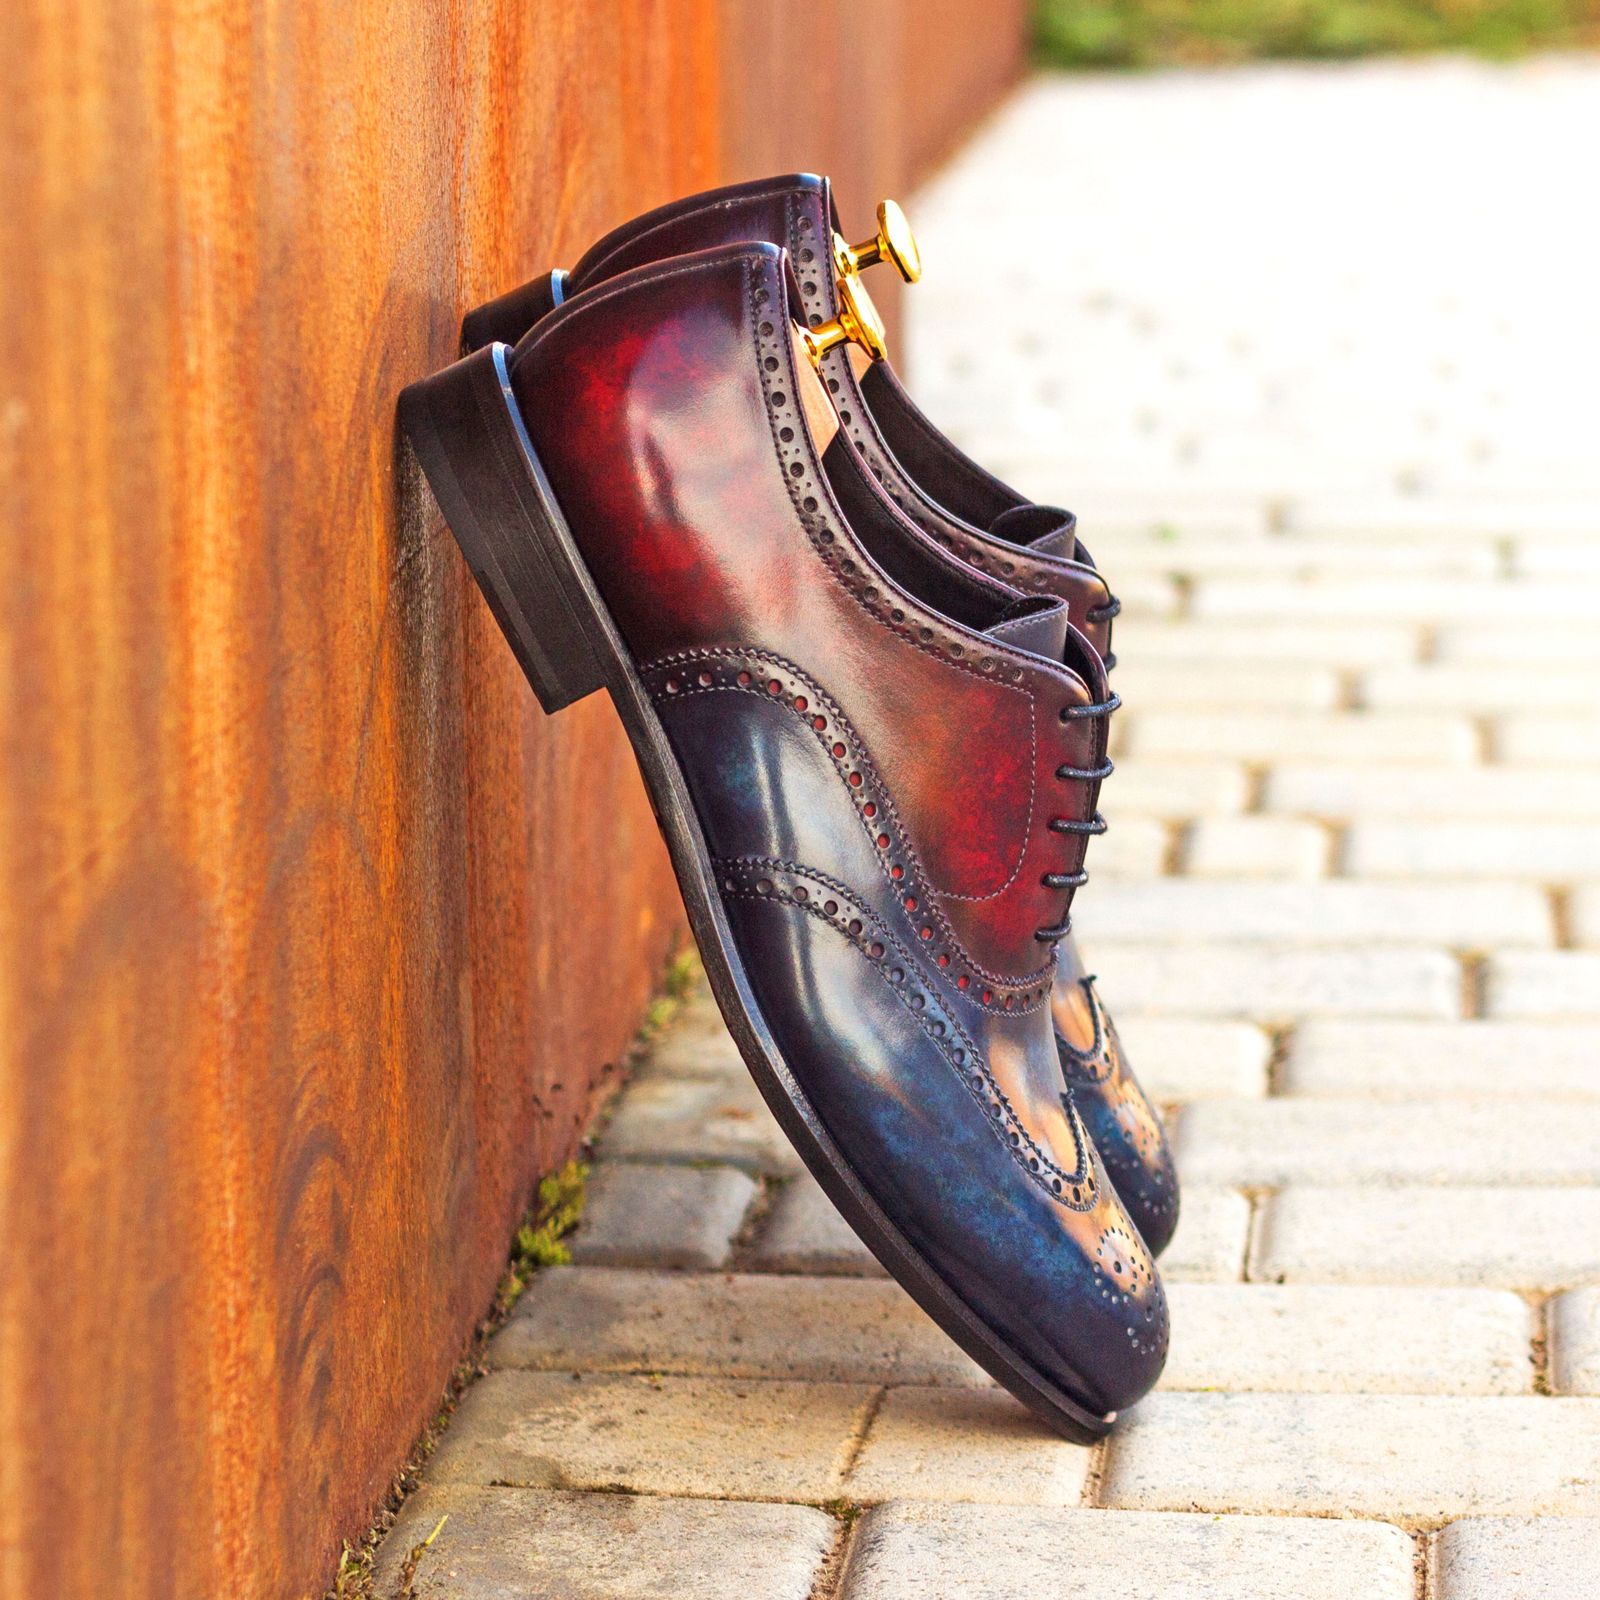 Unique Handcrafted burgundy patina Oxford